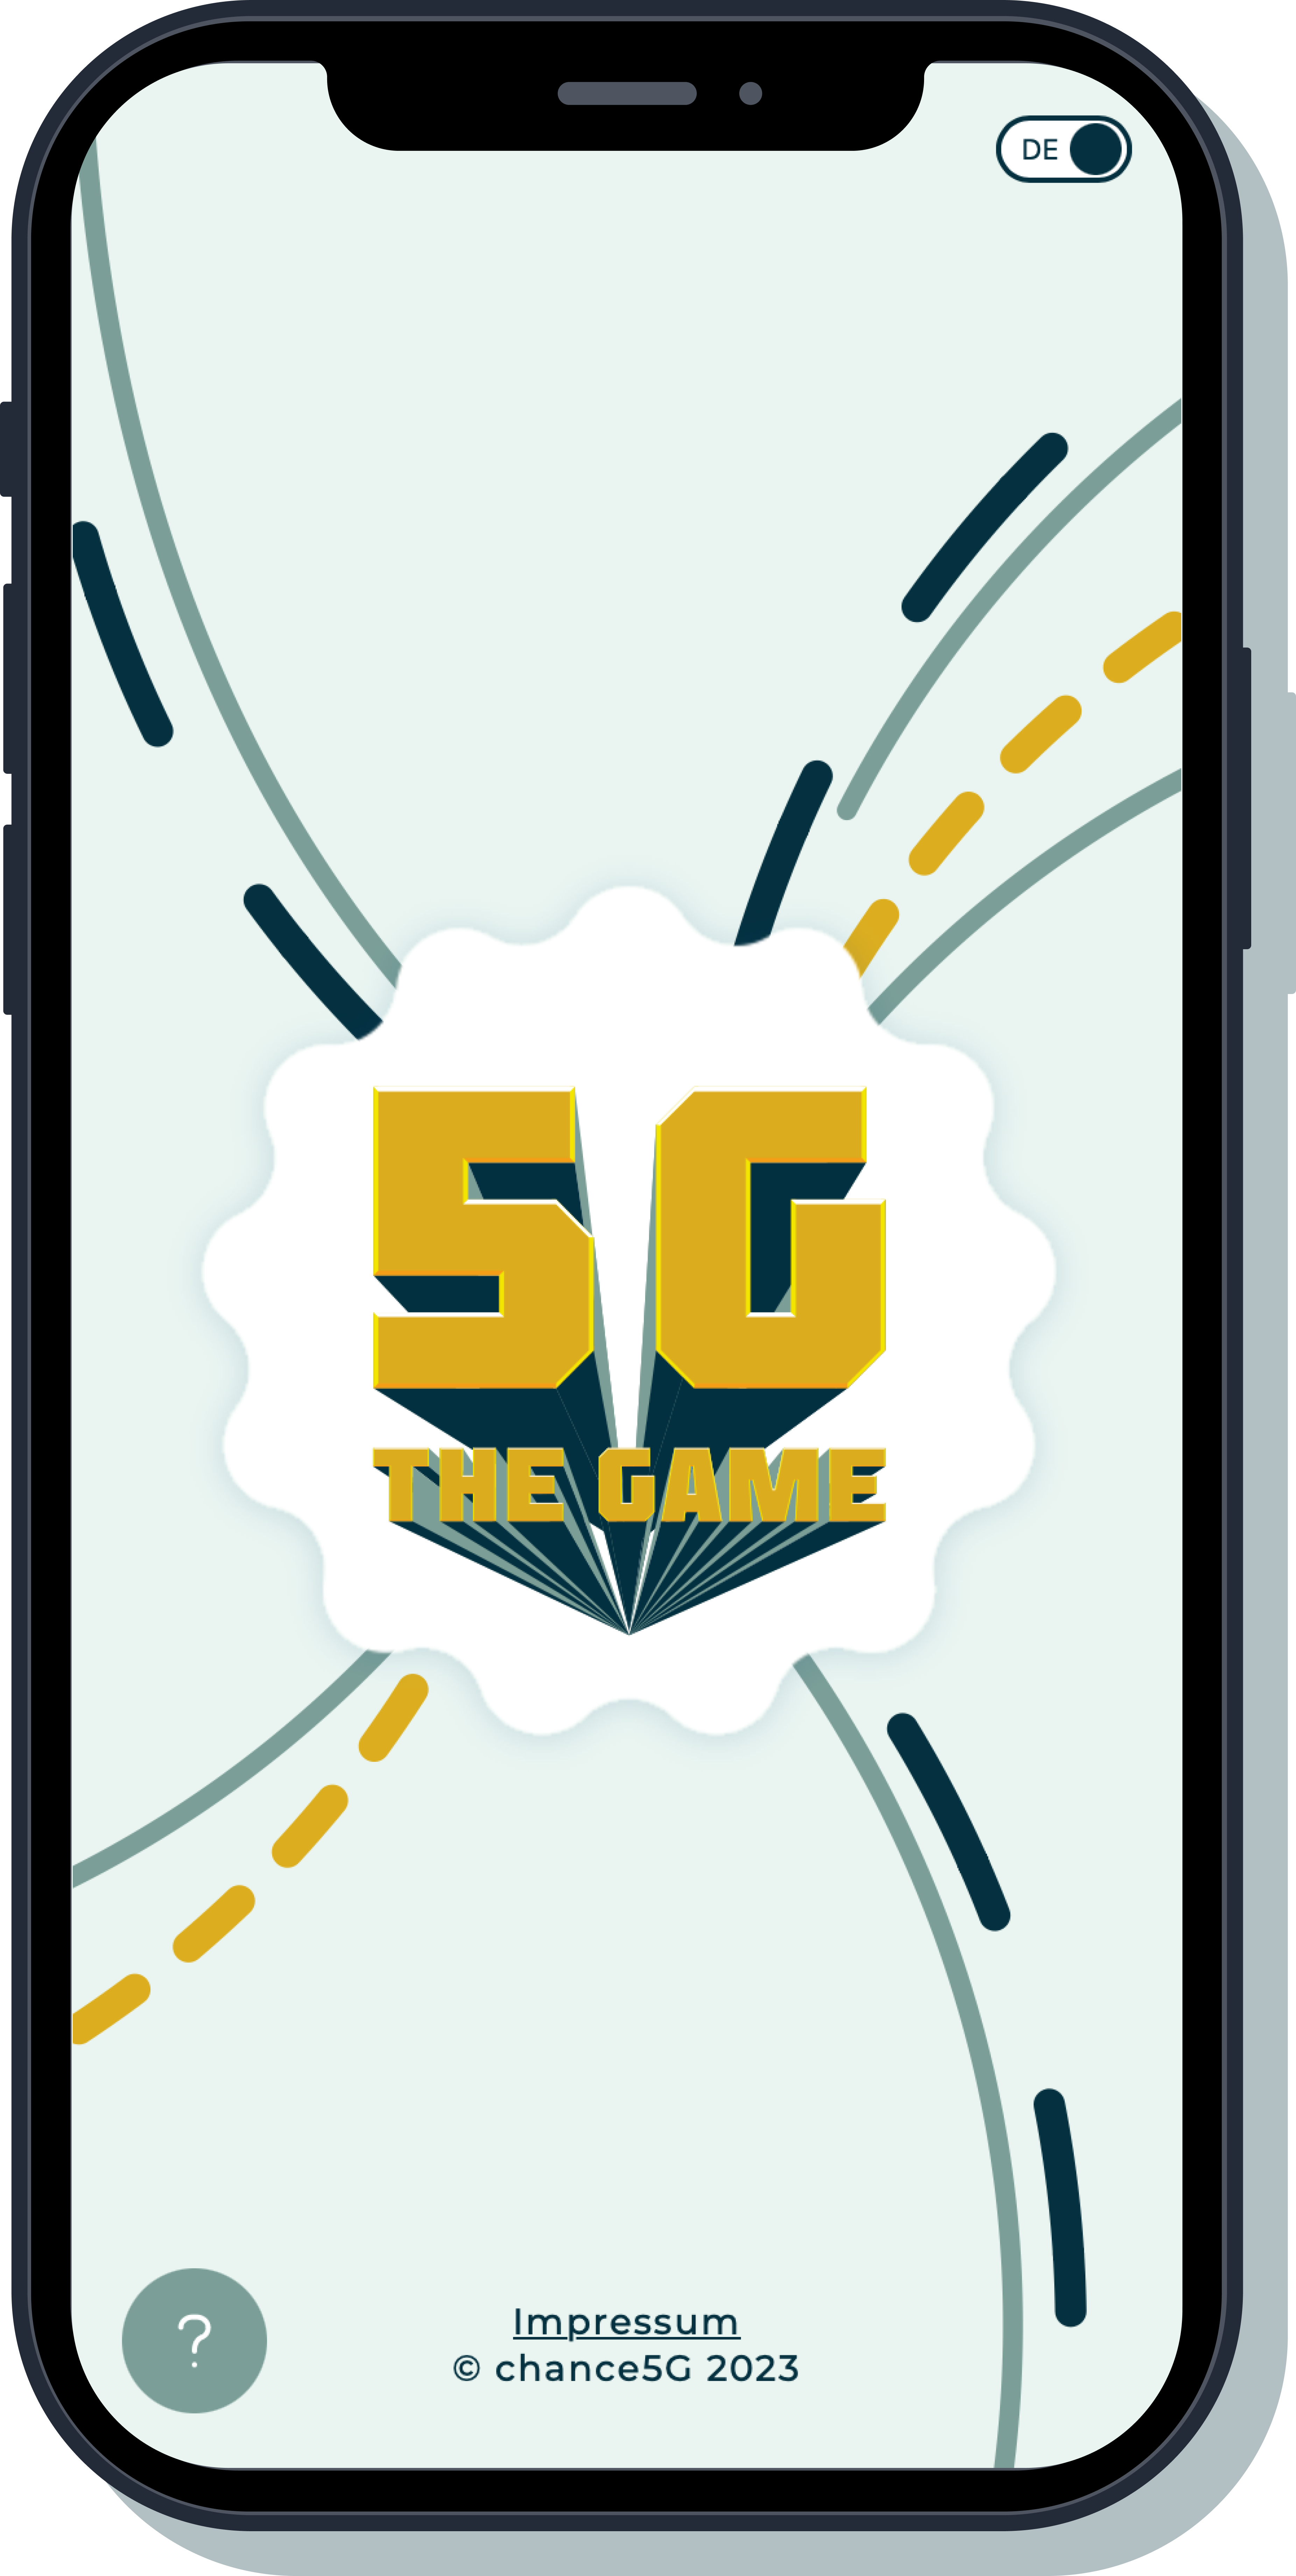 preview of chance5G the game